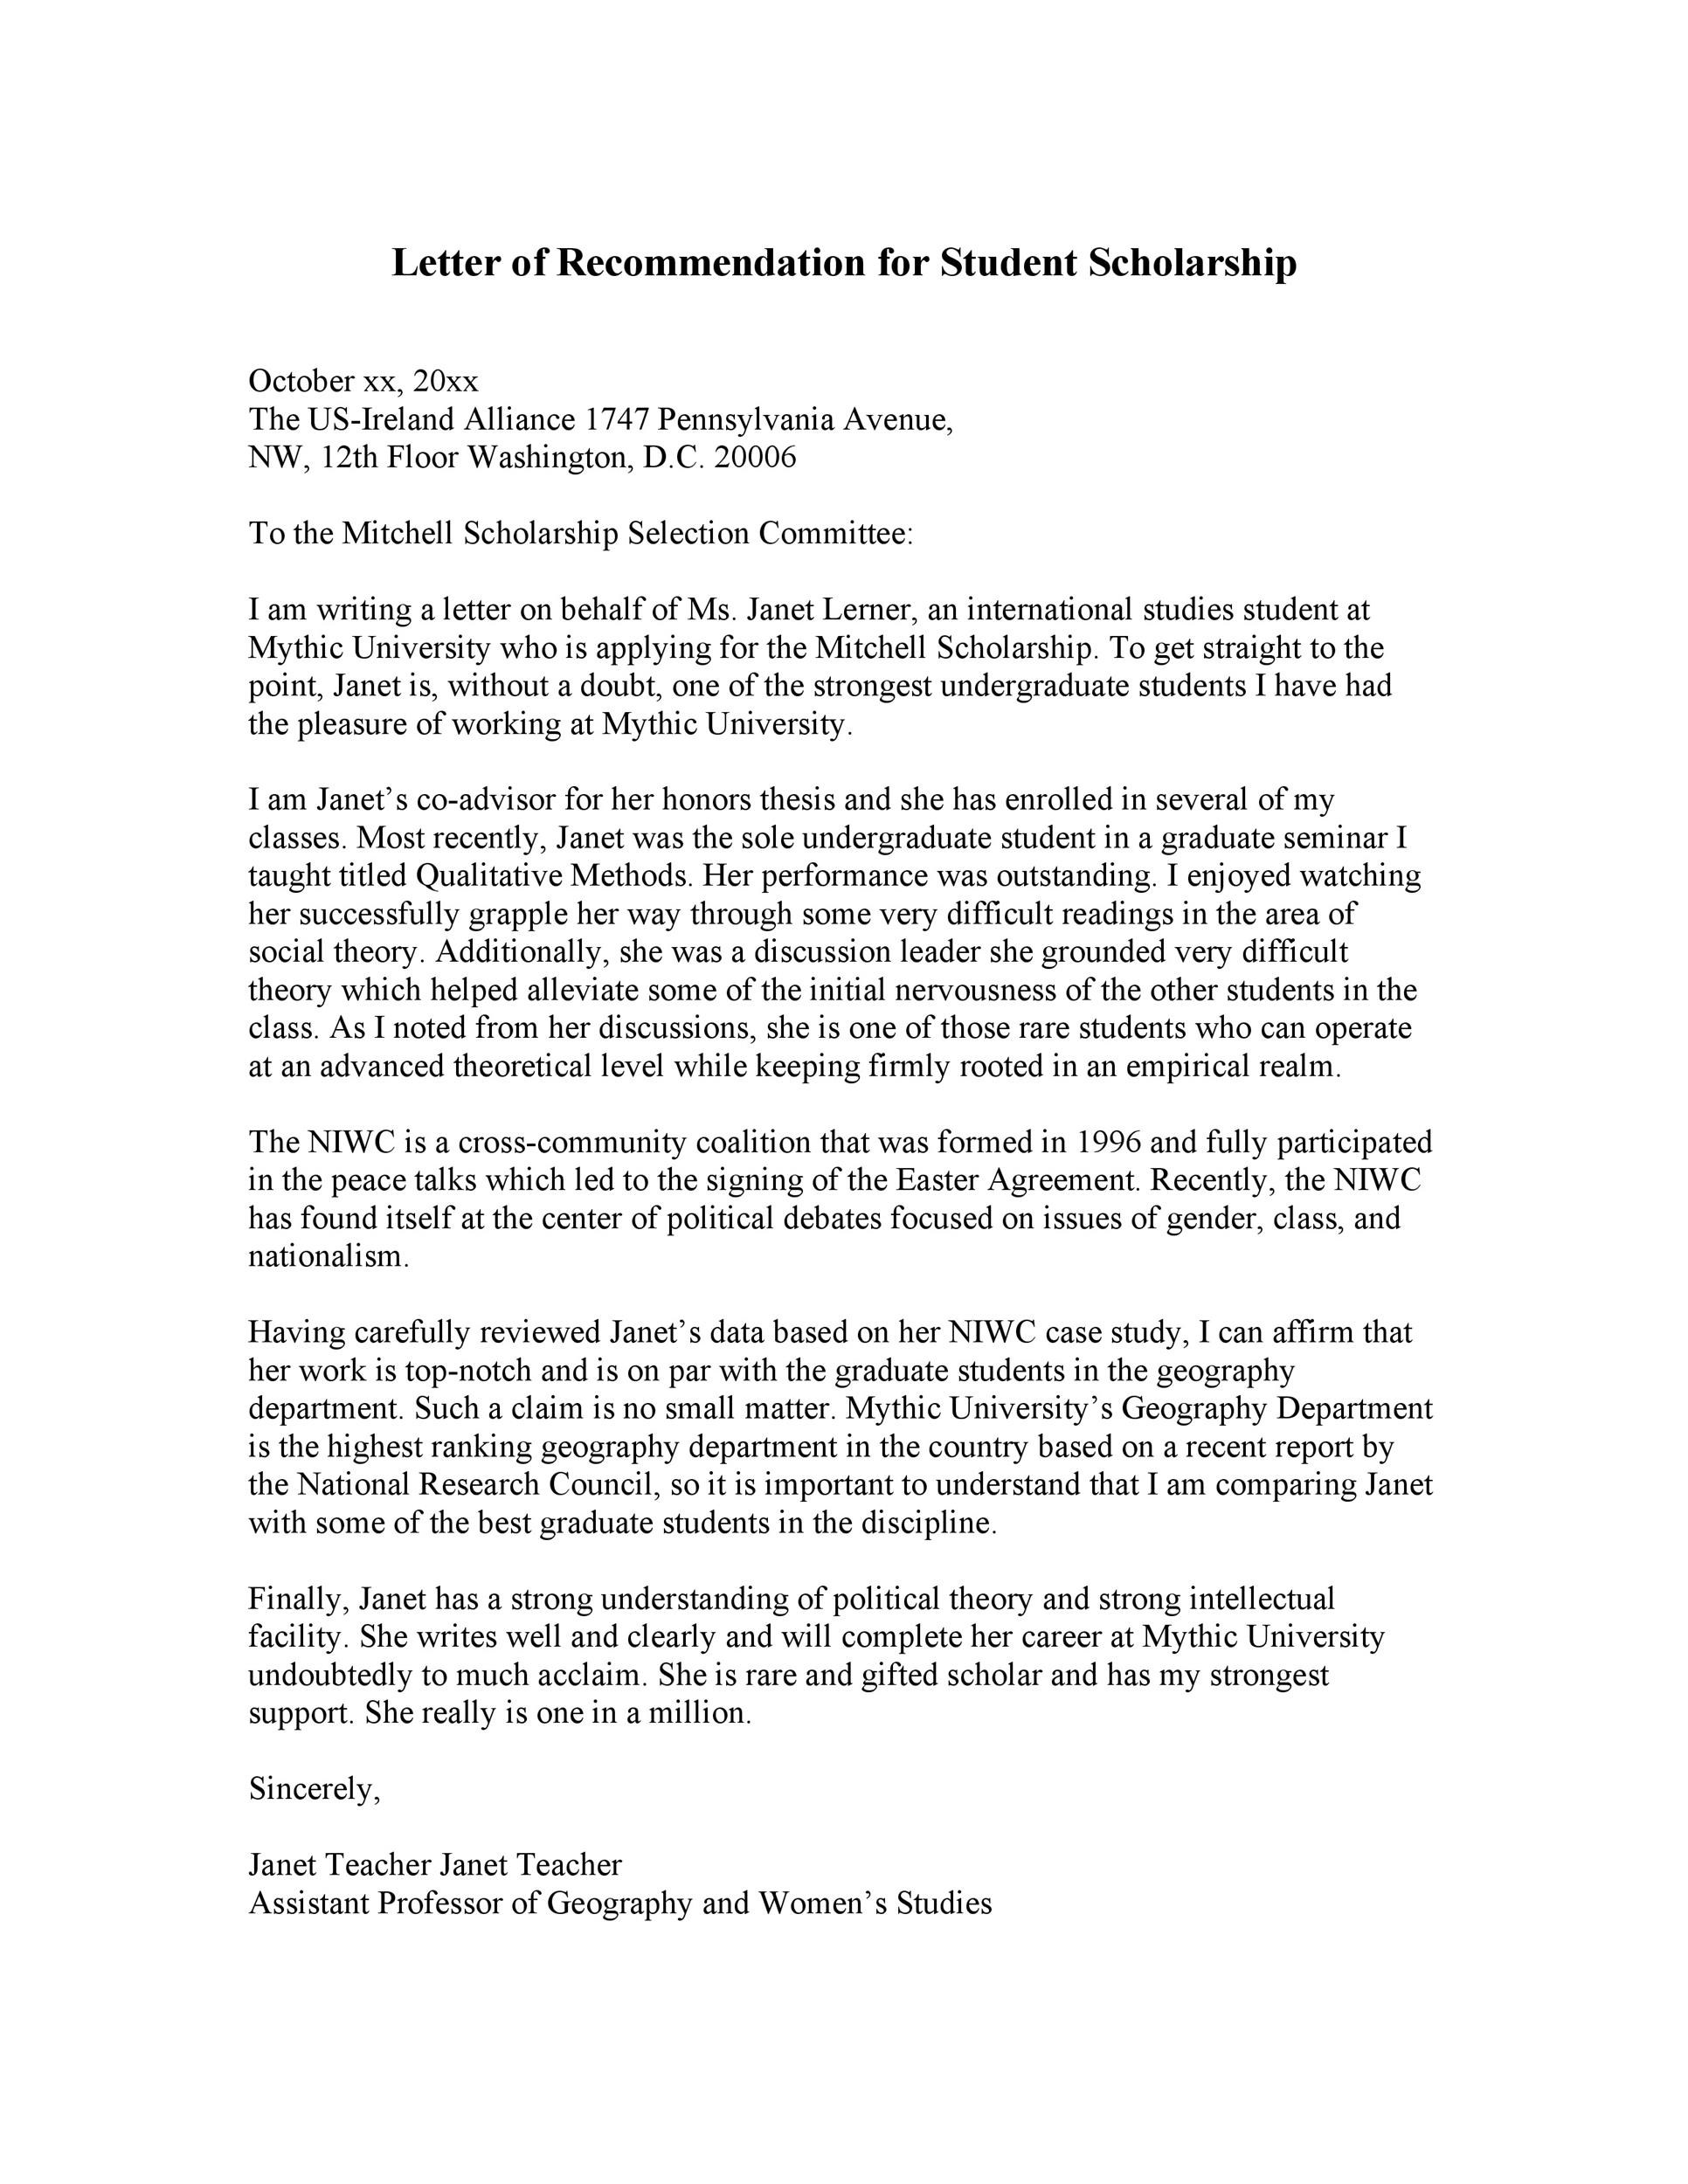 Recommendation Letter Format For Scholarship from templatelab.com